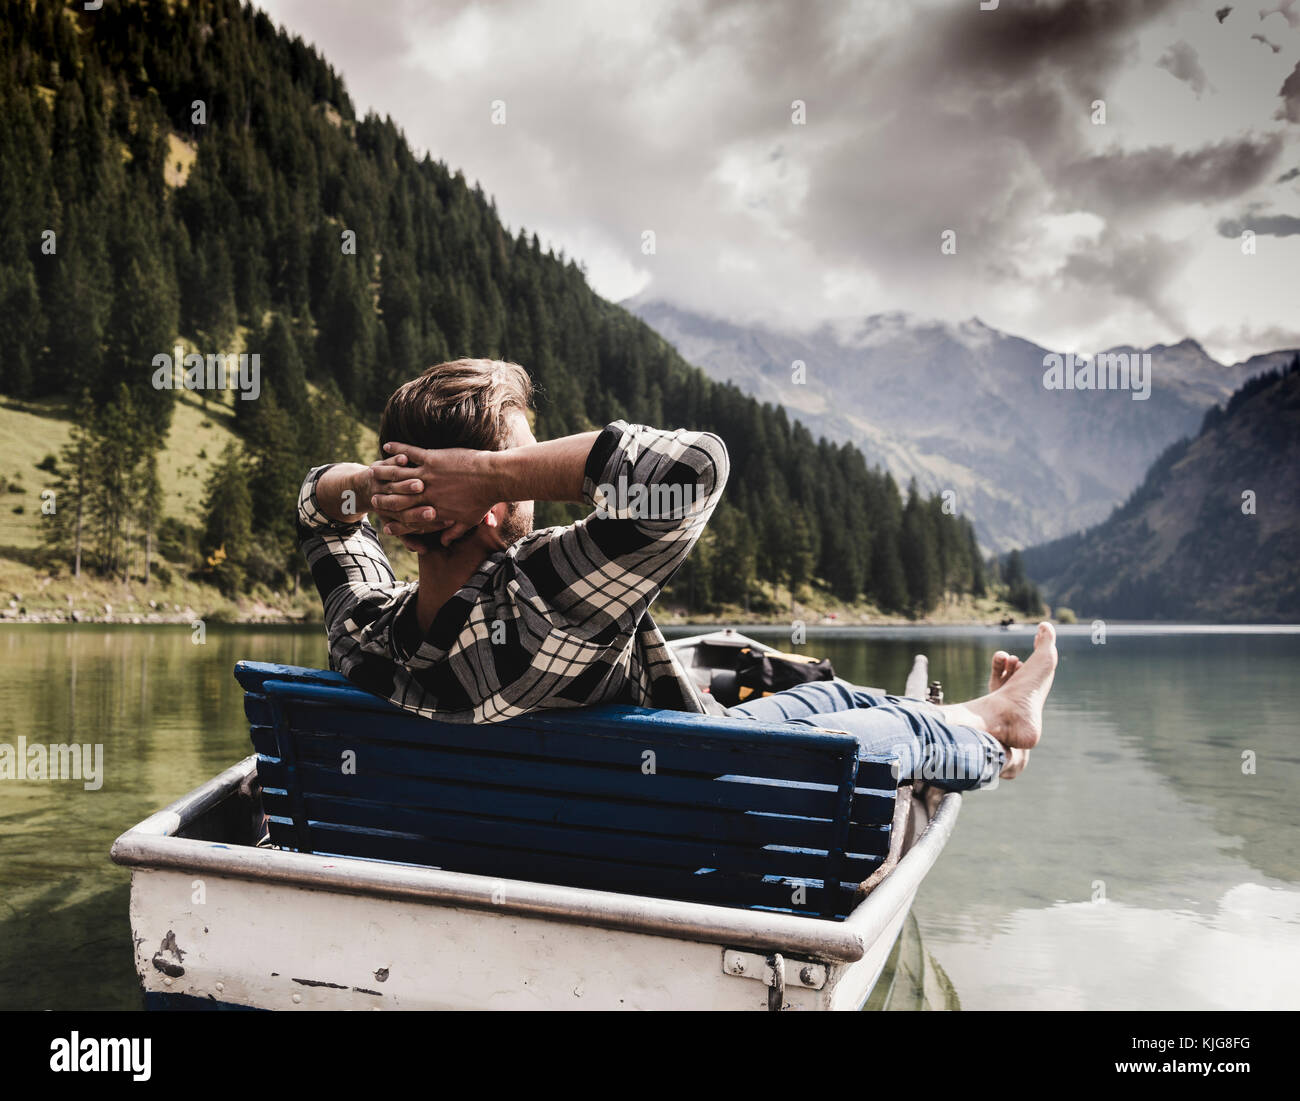 Austria, Tyrol, Alps, relaxed man in boat on mountain lake Stock Photo